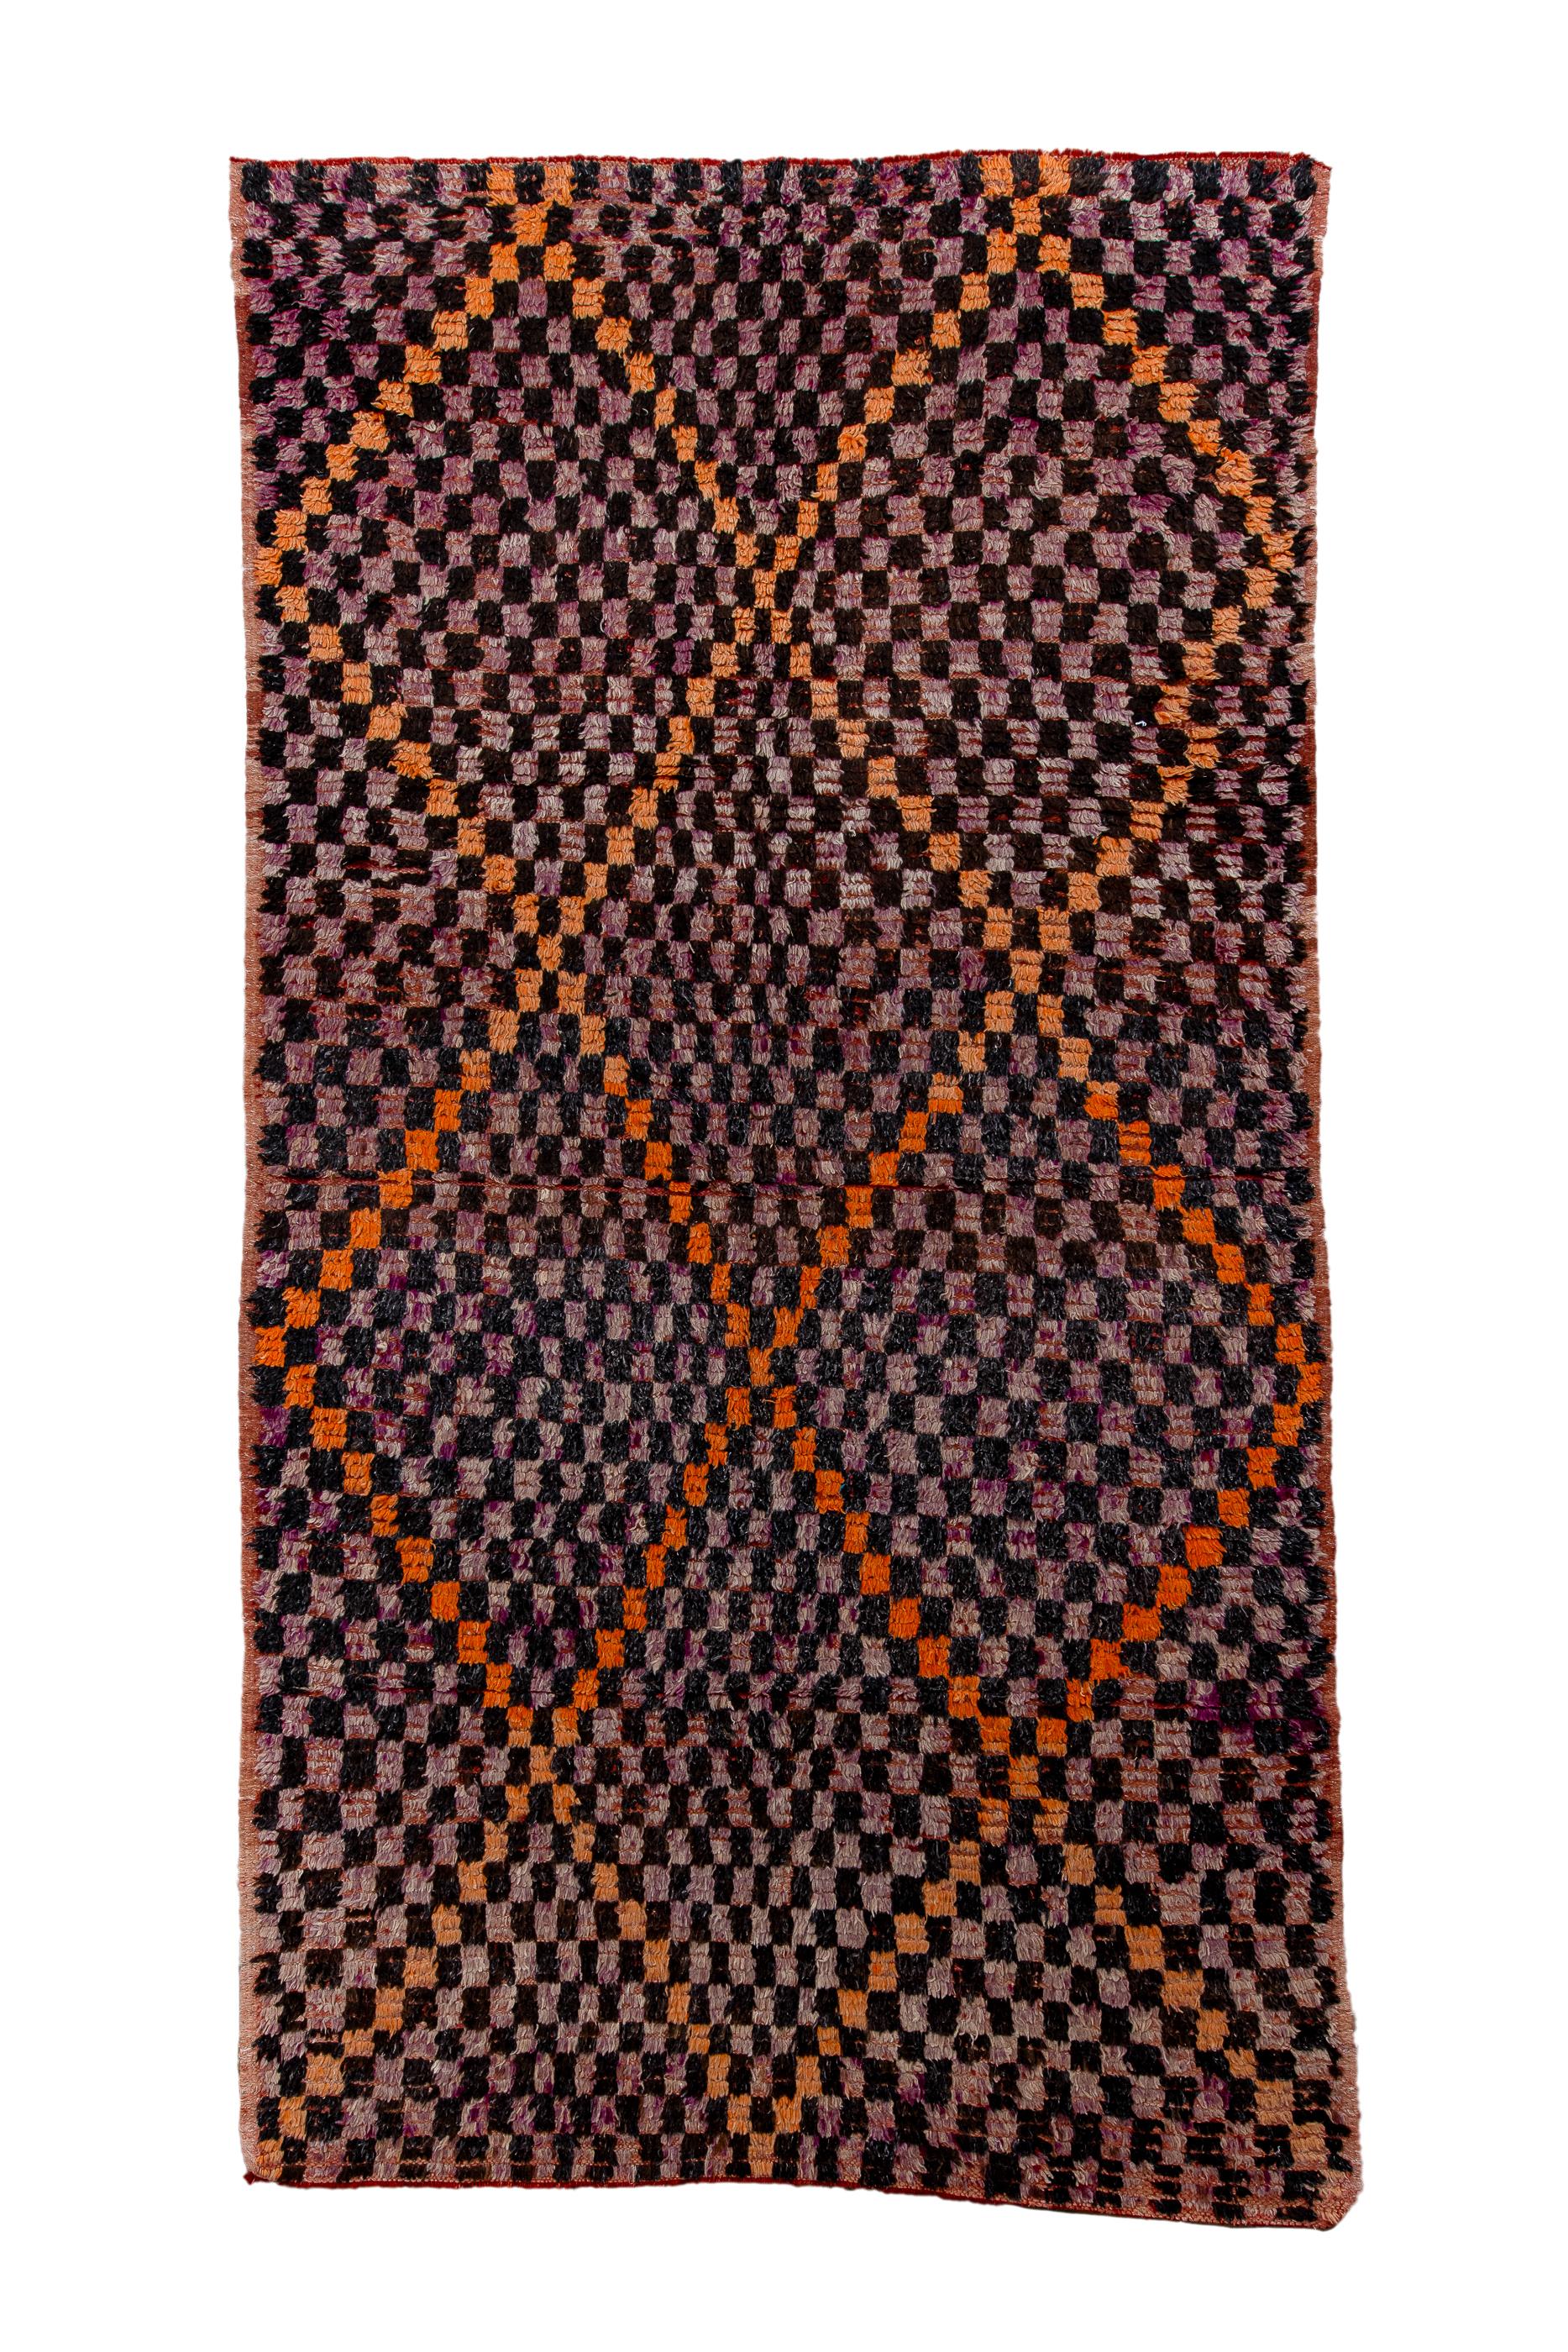 This coarsely-knotted tribal carpet shows  an allover  charcoal and  blue-grey  quasi-chessboard, structured by a broad tangerine lozenge lattice  in the same style. No borders and the tangerine stepped lattice forms triangles at one end, and along